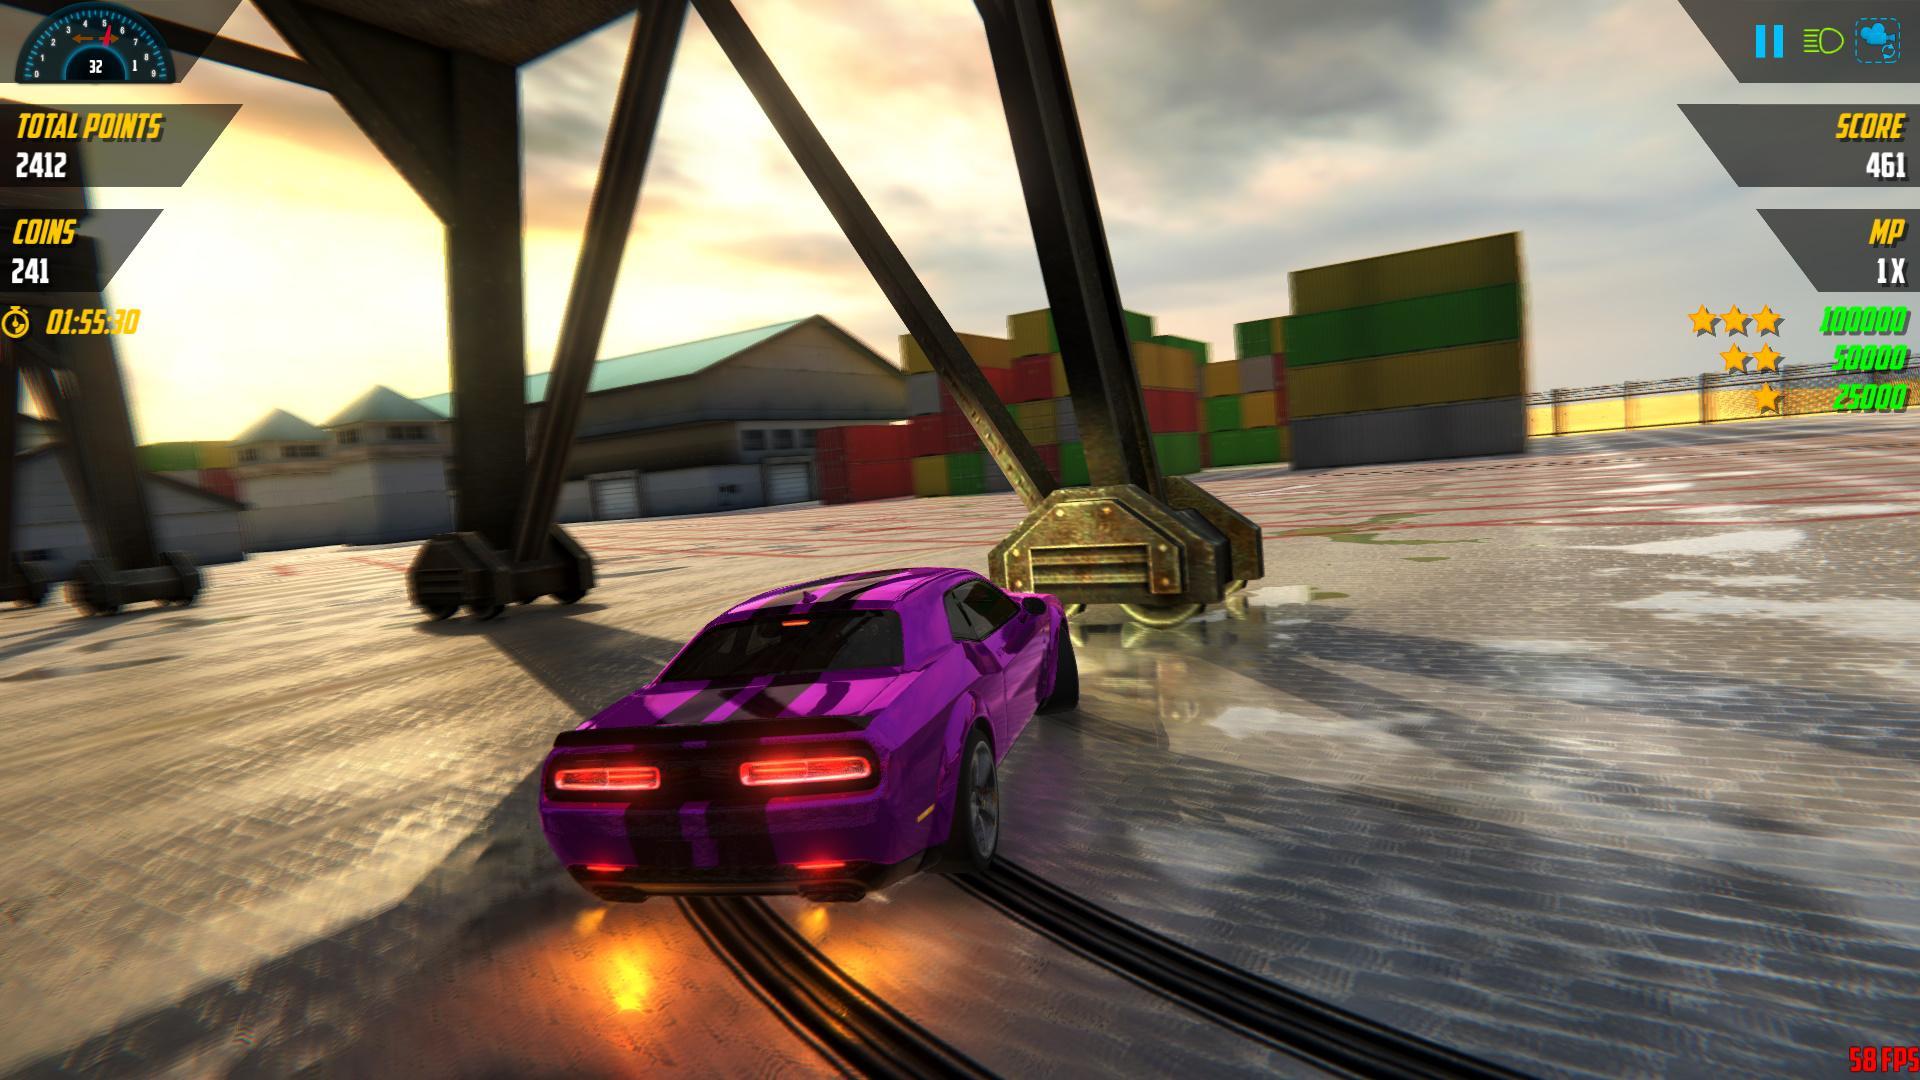 Burnout Drift 3 for Android - APK Download